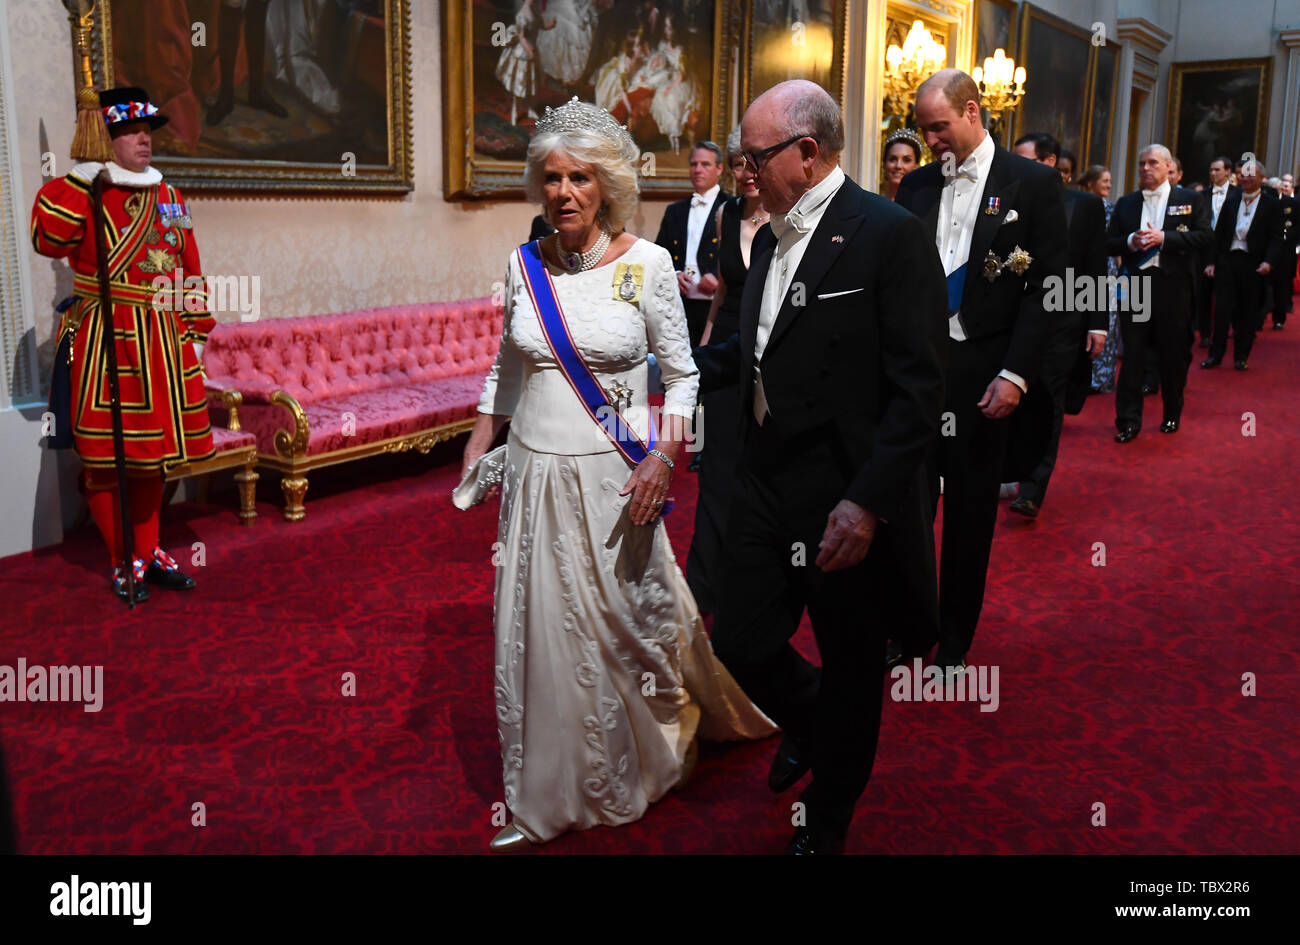 Duchess of Cornwall and Robert Wood Johnson, the United States Ambassador to the United Kingdom, arrive through the East Gallery during the State Banquet at Buckingham Palace, London, on day one of the US President's three day state visit to the UK. Stock Photo